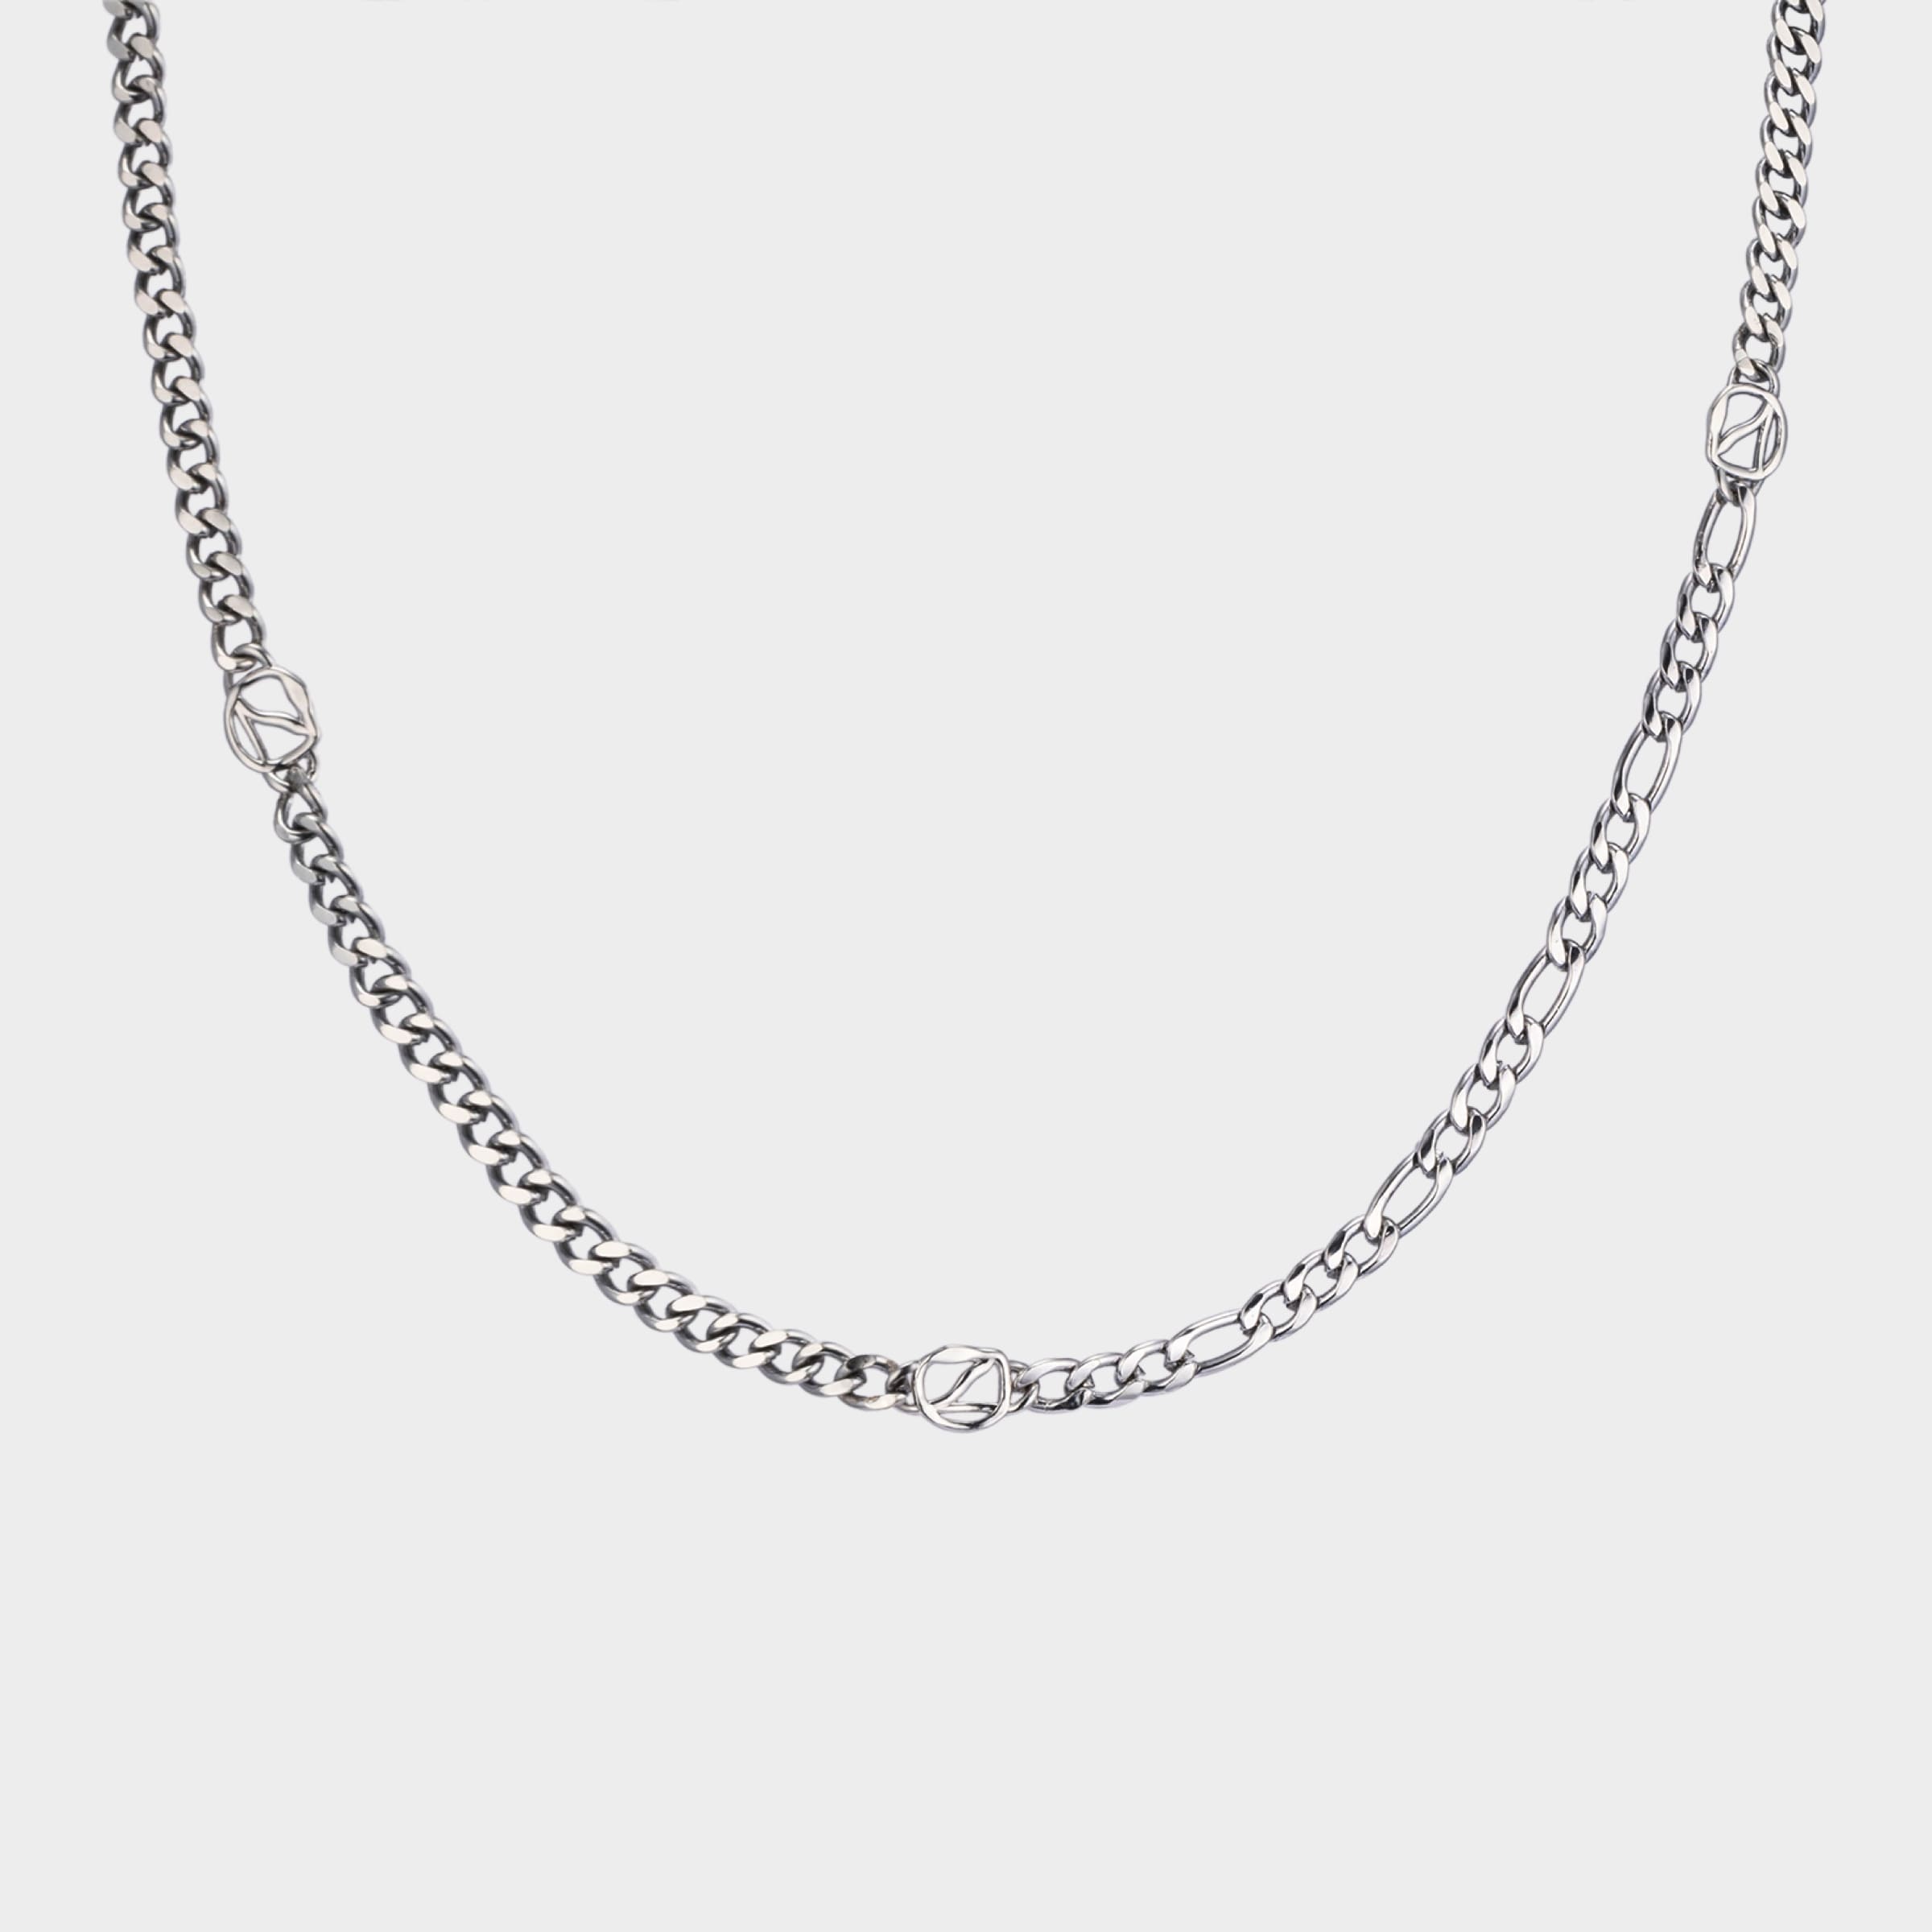 Zミックス チェーン ネックレス / Z MIX CHAIN NECKLACE|10795円 